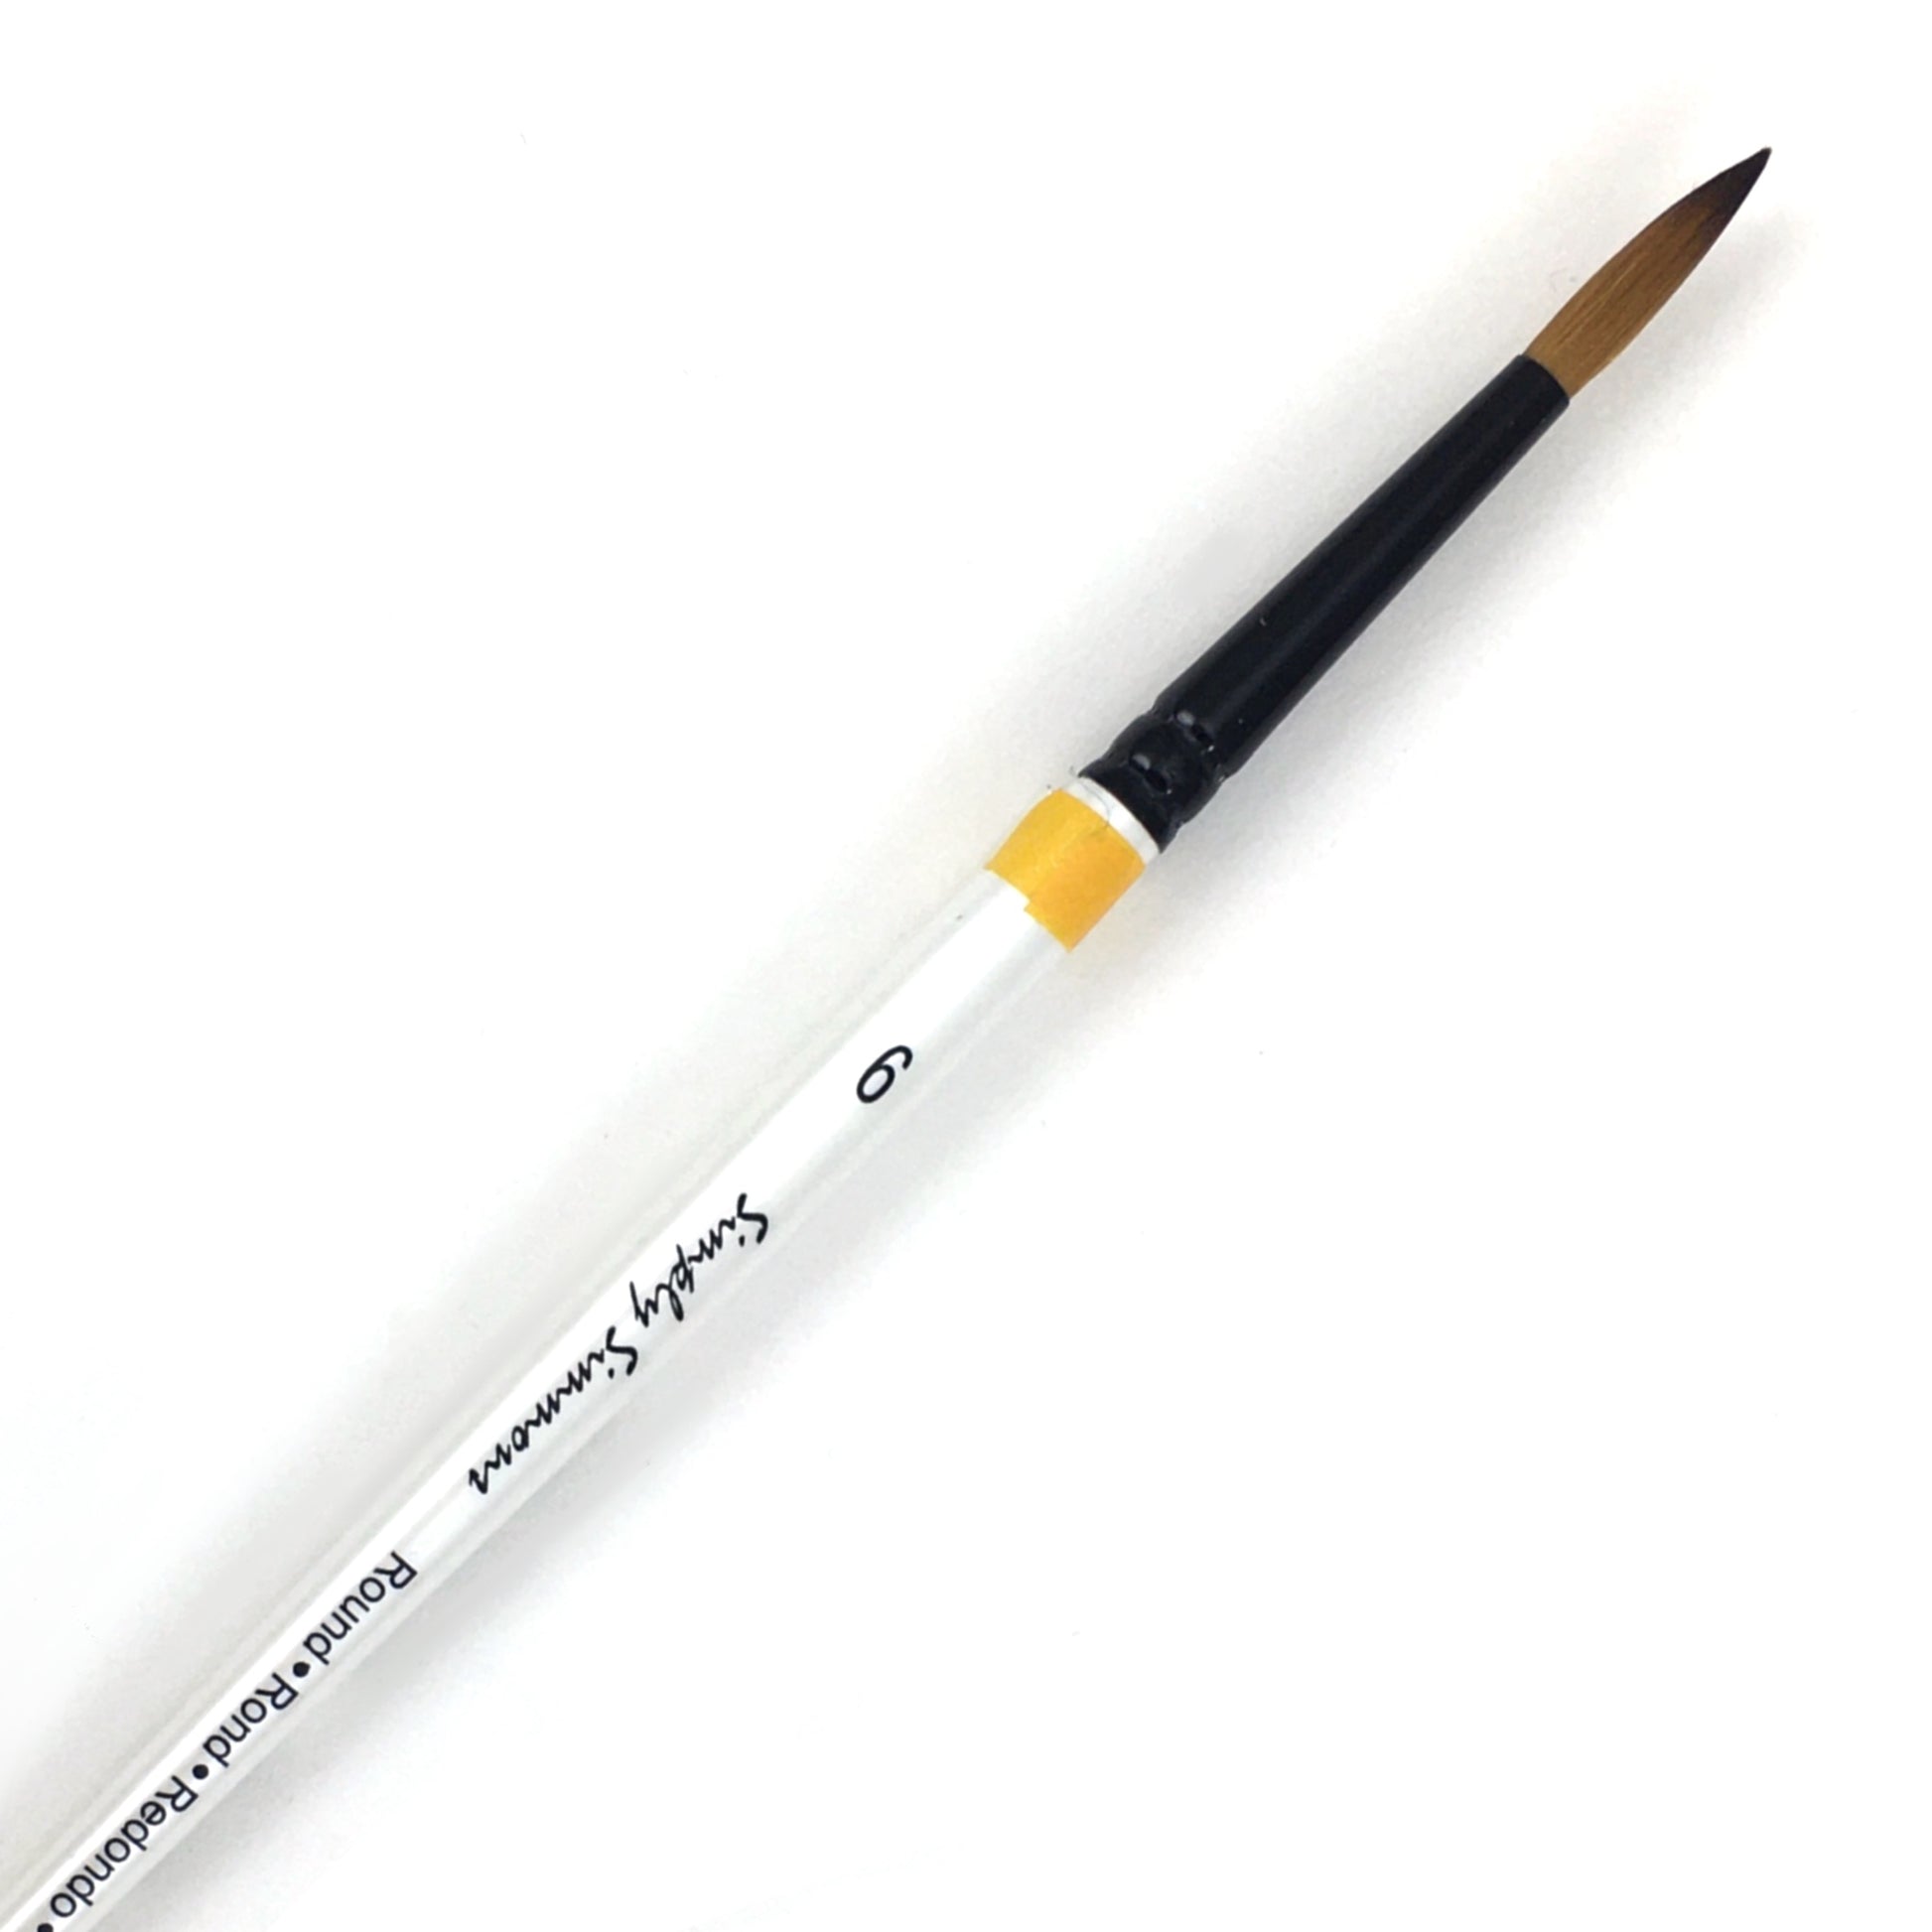 Simply Simmons All-Media Brush - Short Handle - by Robert Simmons - K. A. Artist Shop